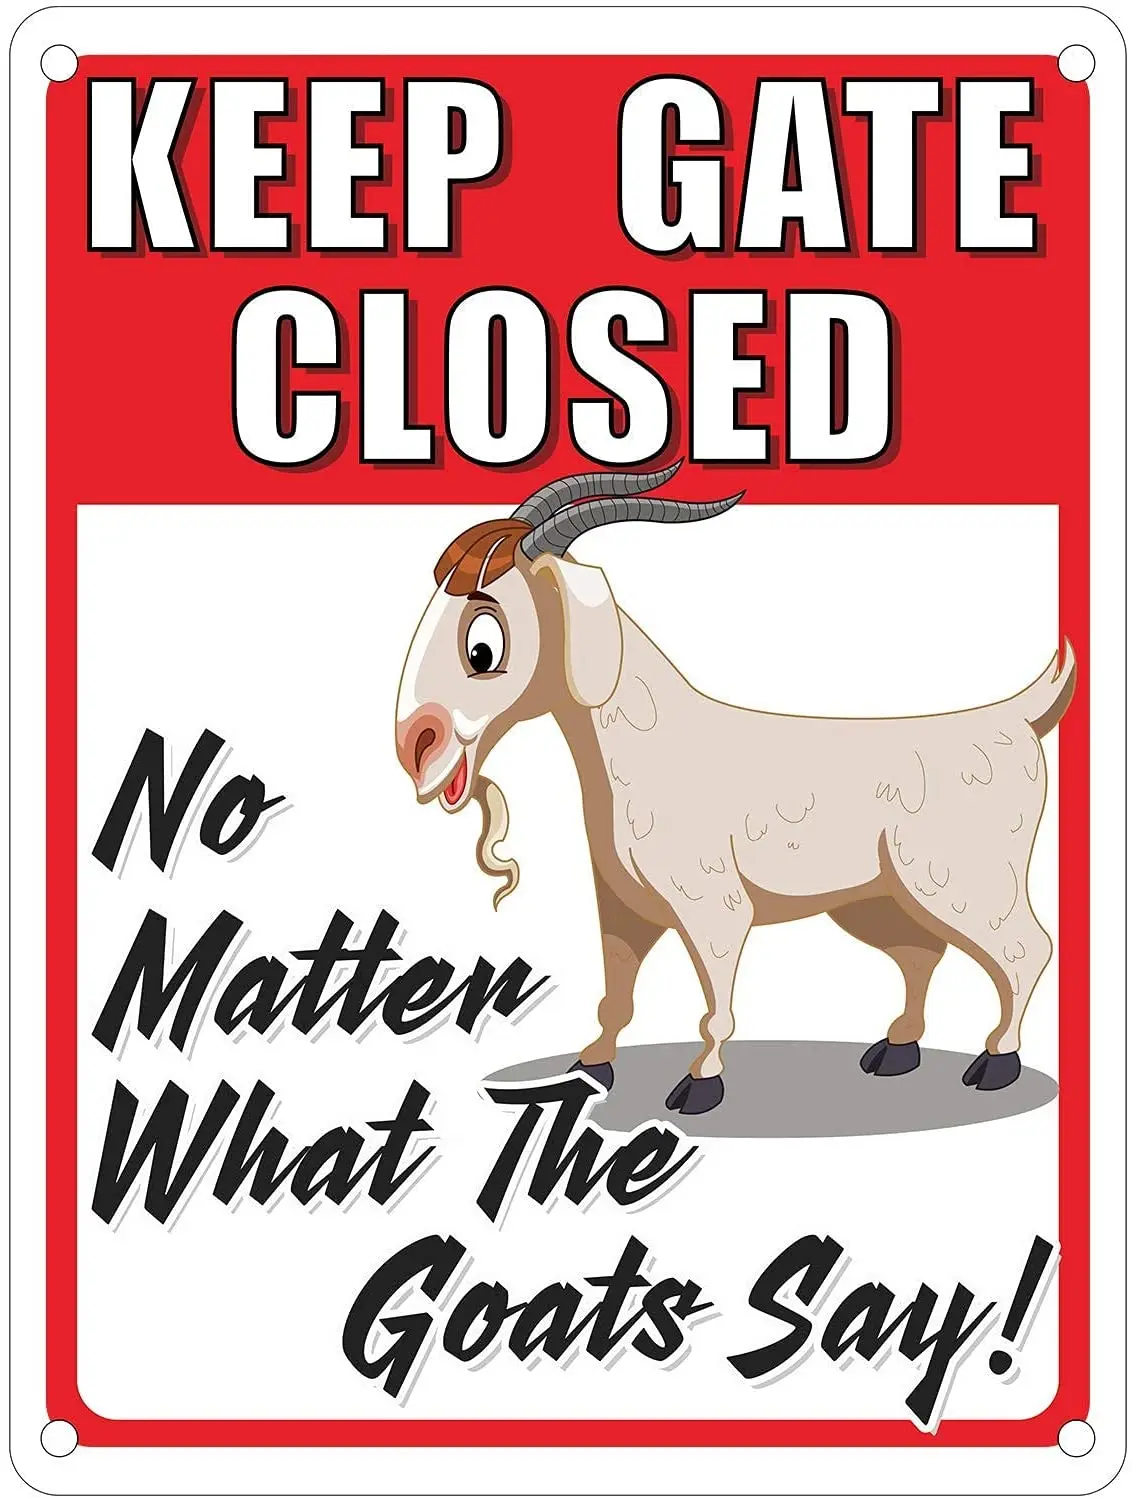 

Keep The Gate Closed Metal Tin Sign No Matter What The Goats Say Poster Painting Funny Farmhouse Ranch Warning Decorations